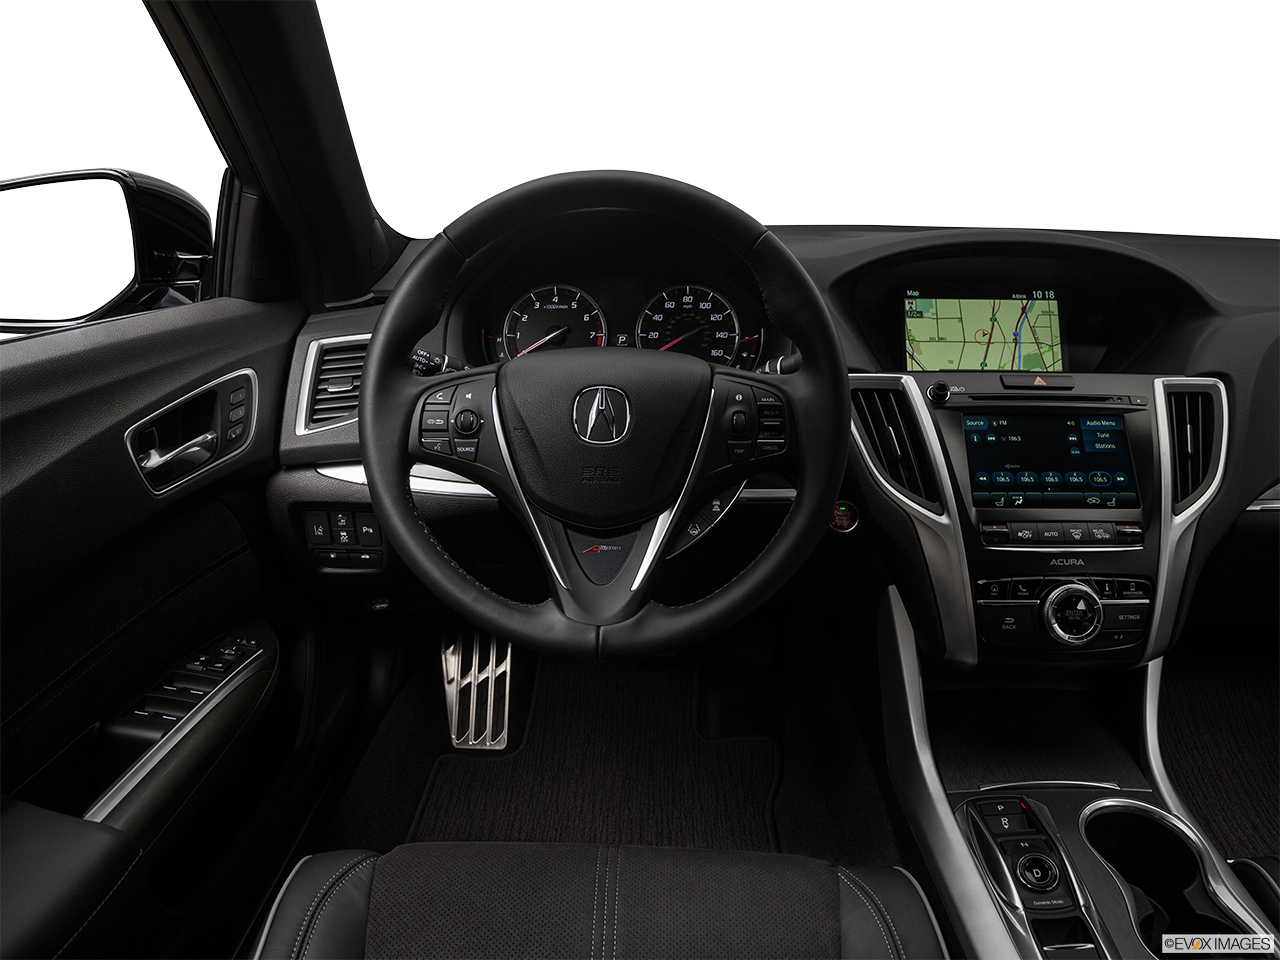 2020 Acura TLX 3.5L Steering wheel/Center Console. 